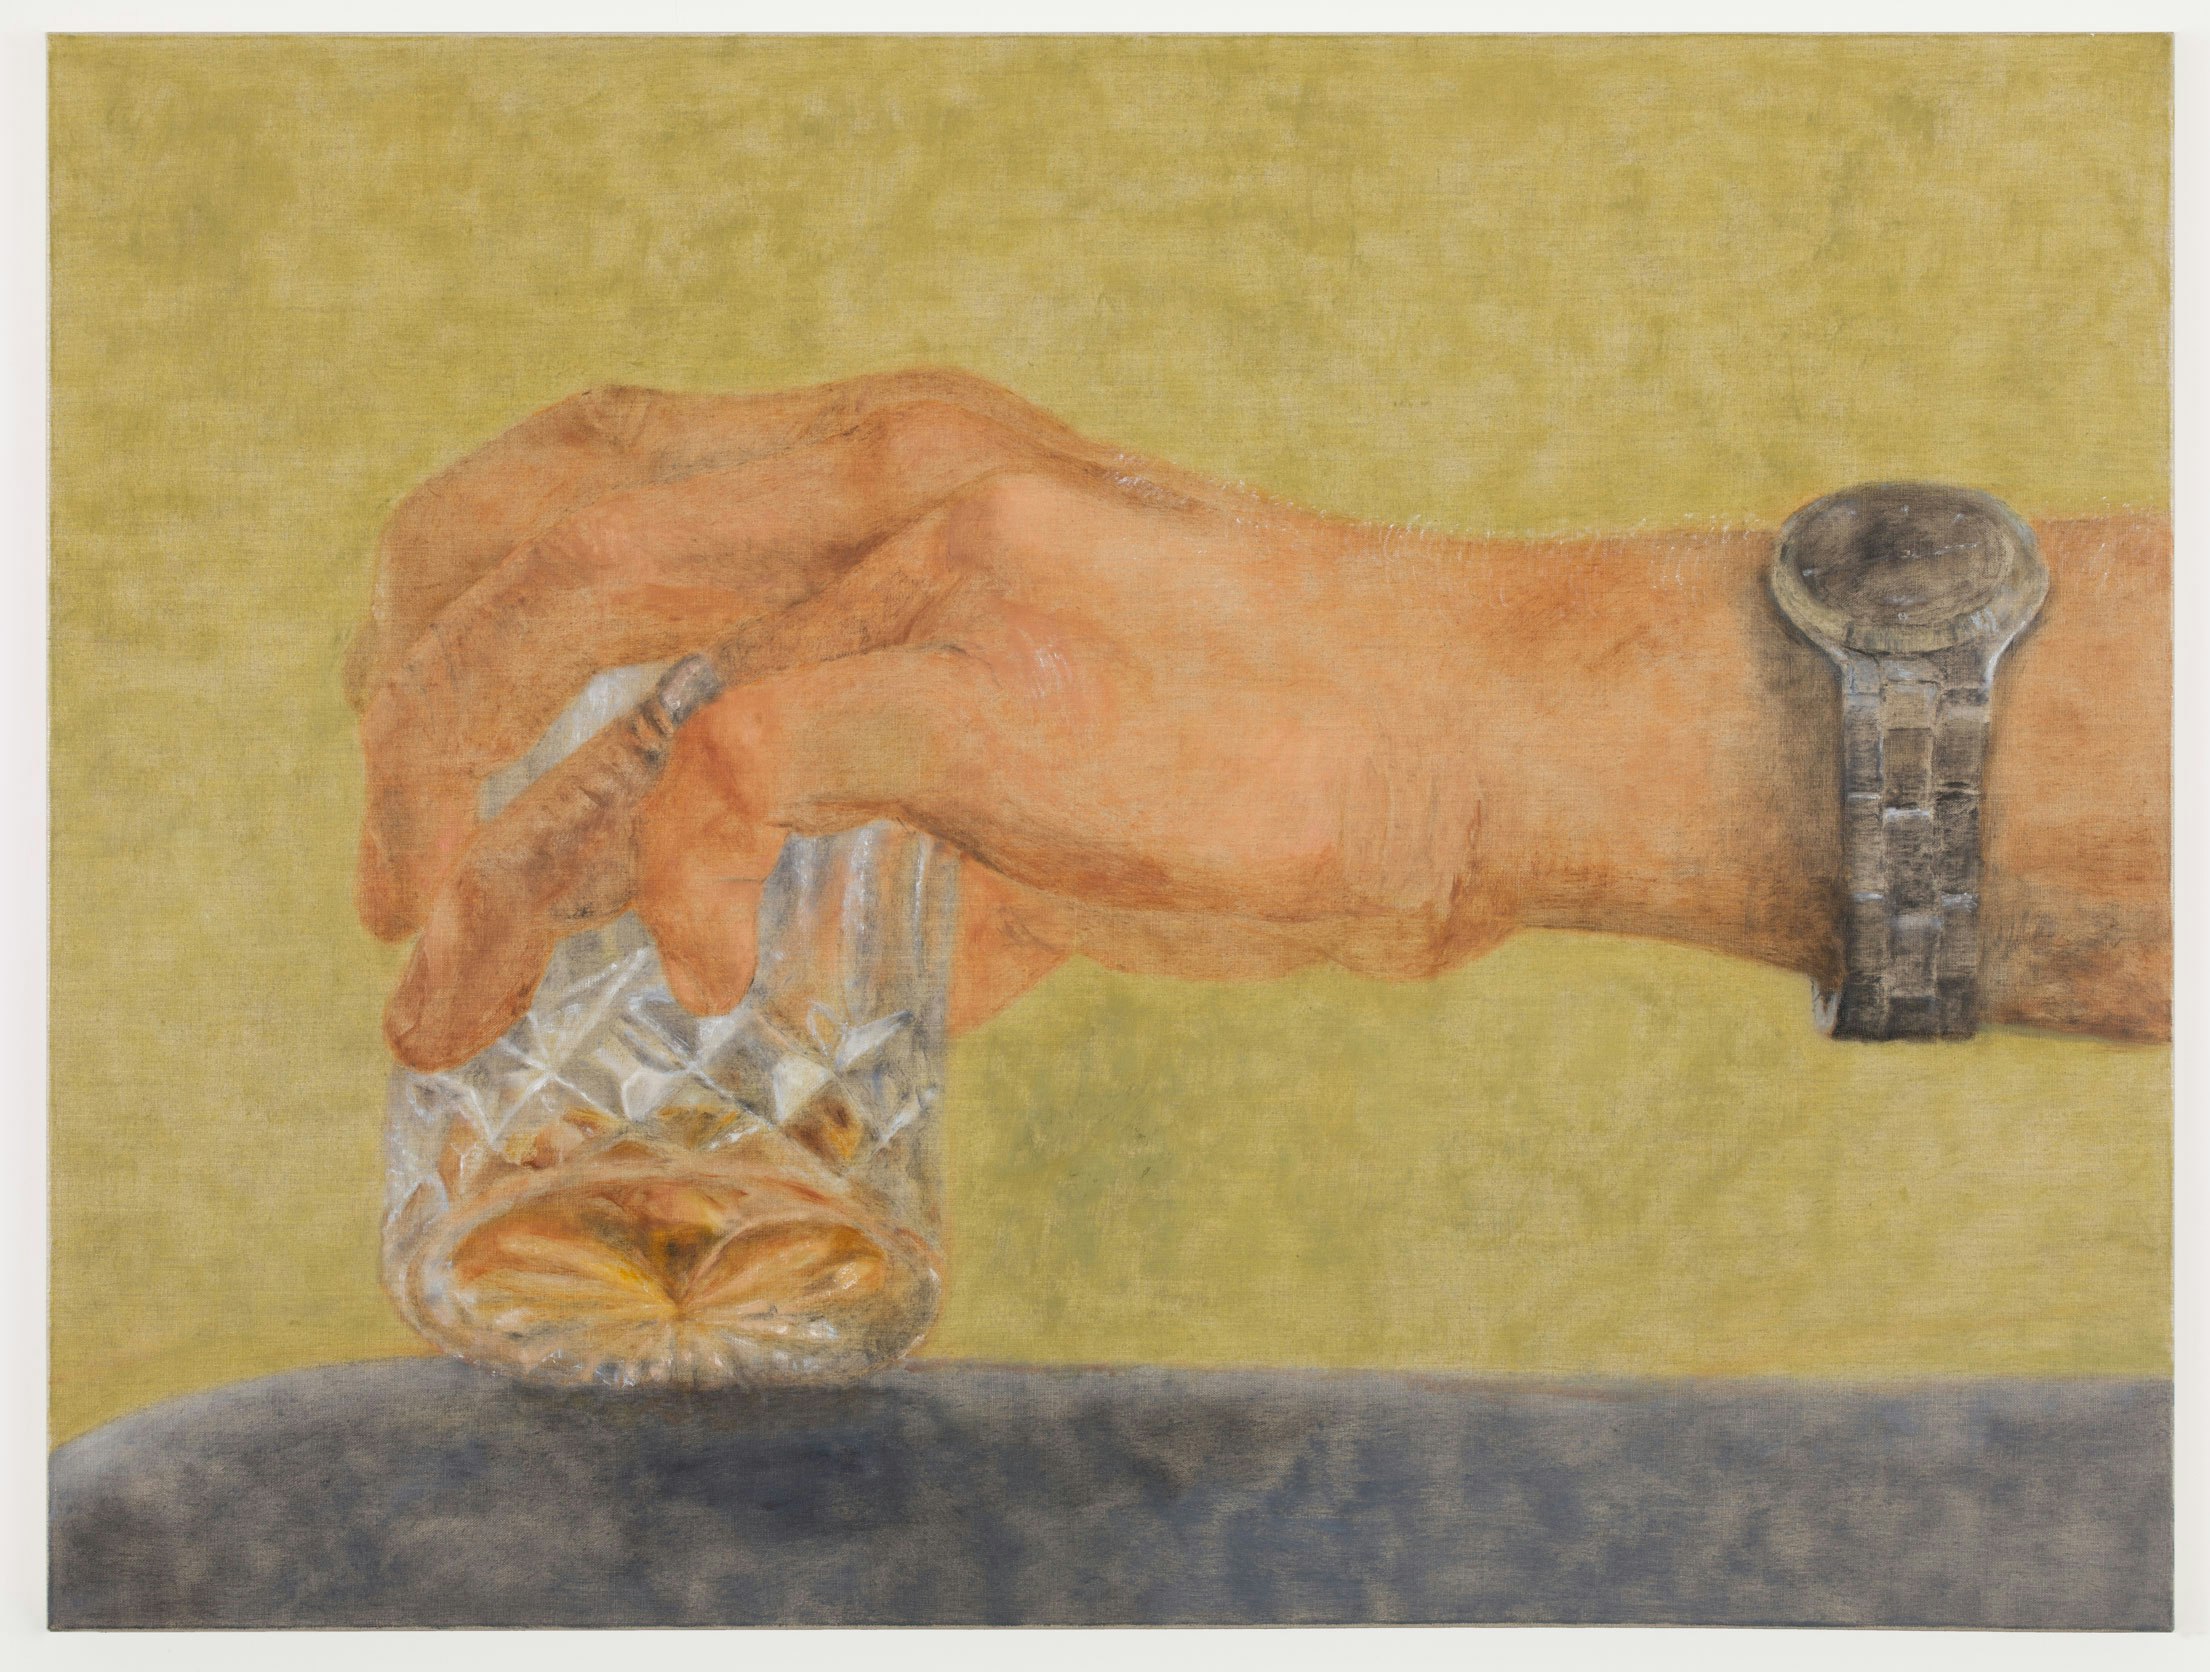 Katelyn Eichwald, <em>Thirsty</em>, 2021. Oil on linen, 36 x 48 inches. Courtesy the artist and Fortnight Institute, New York.